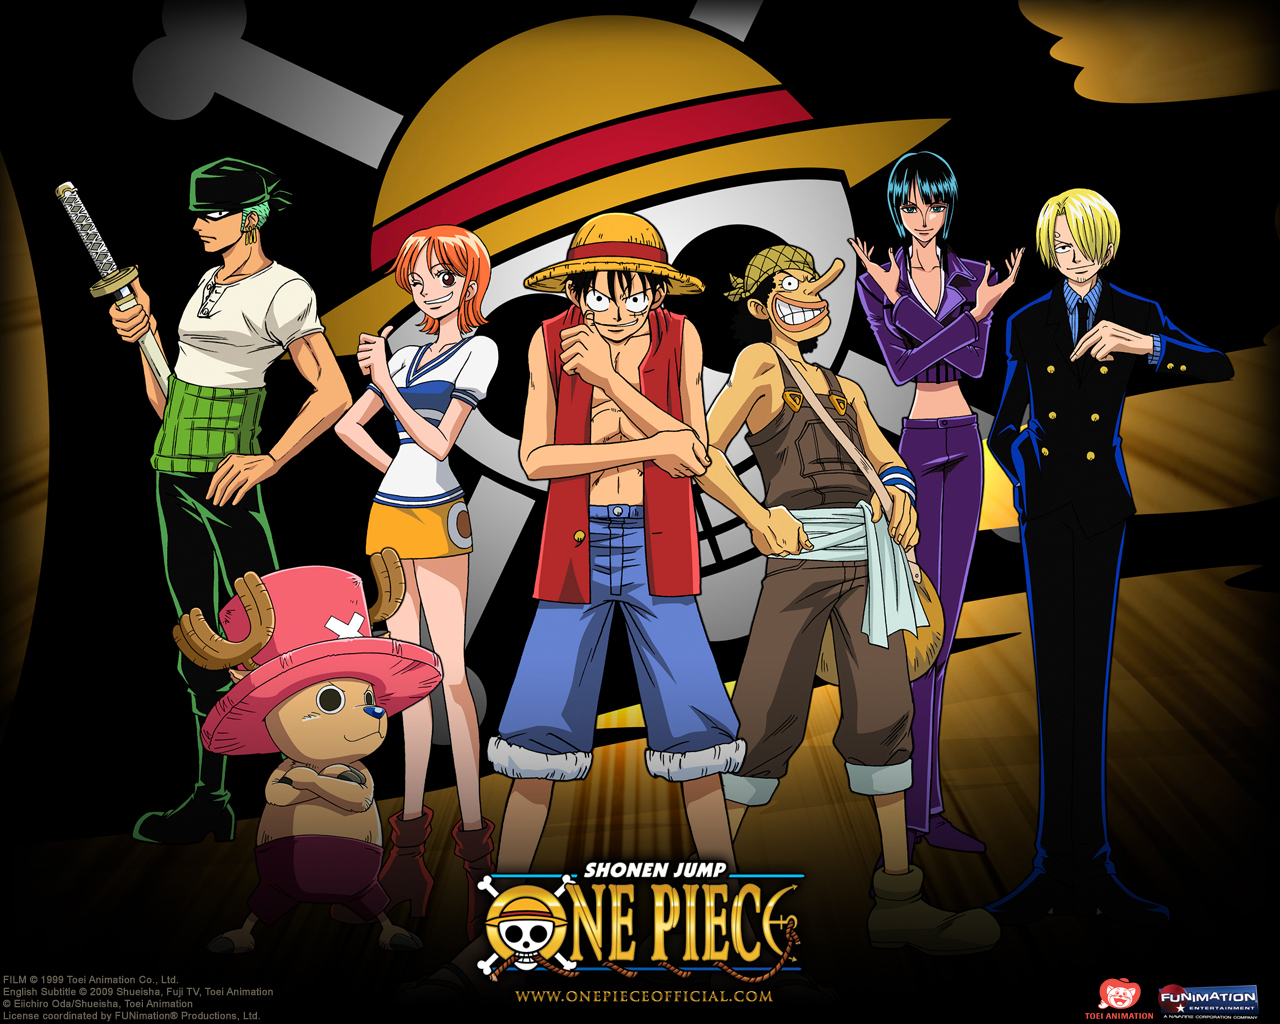 One Piece All Characters Anime Wallpaper Design Hey